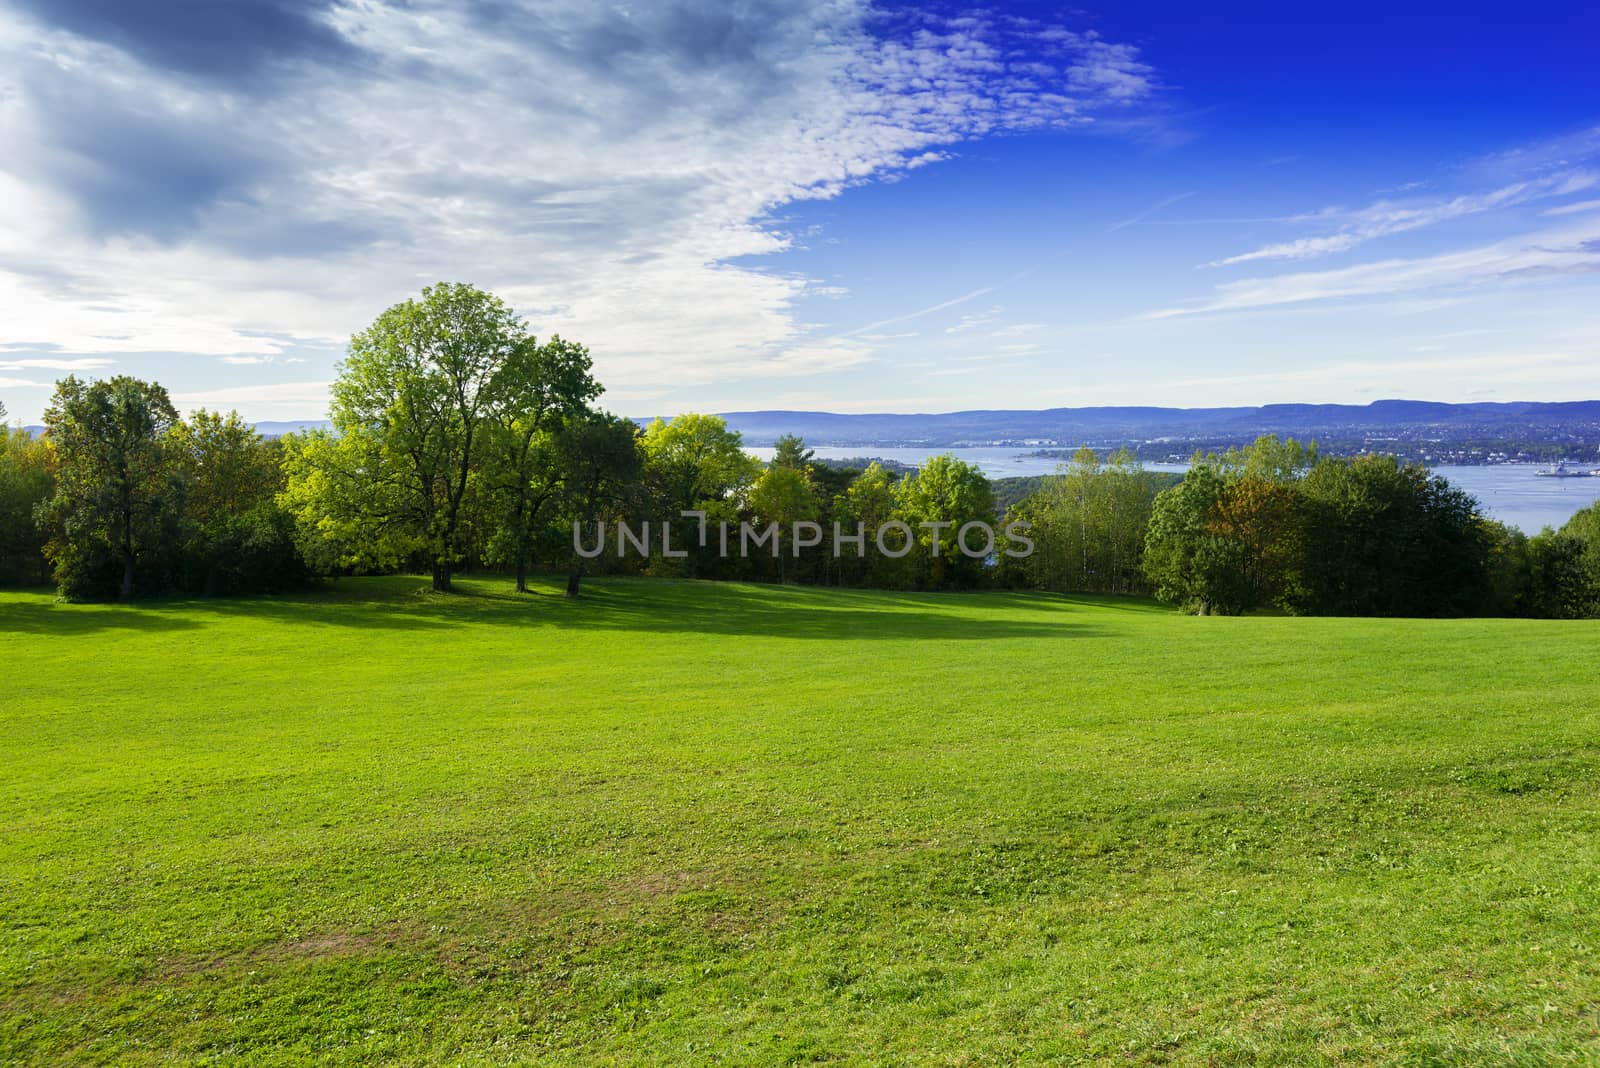 Grassy meadow with trees, sky and clouds